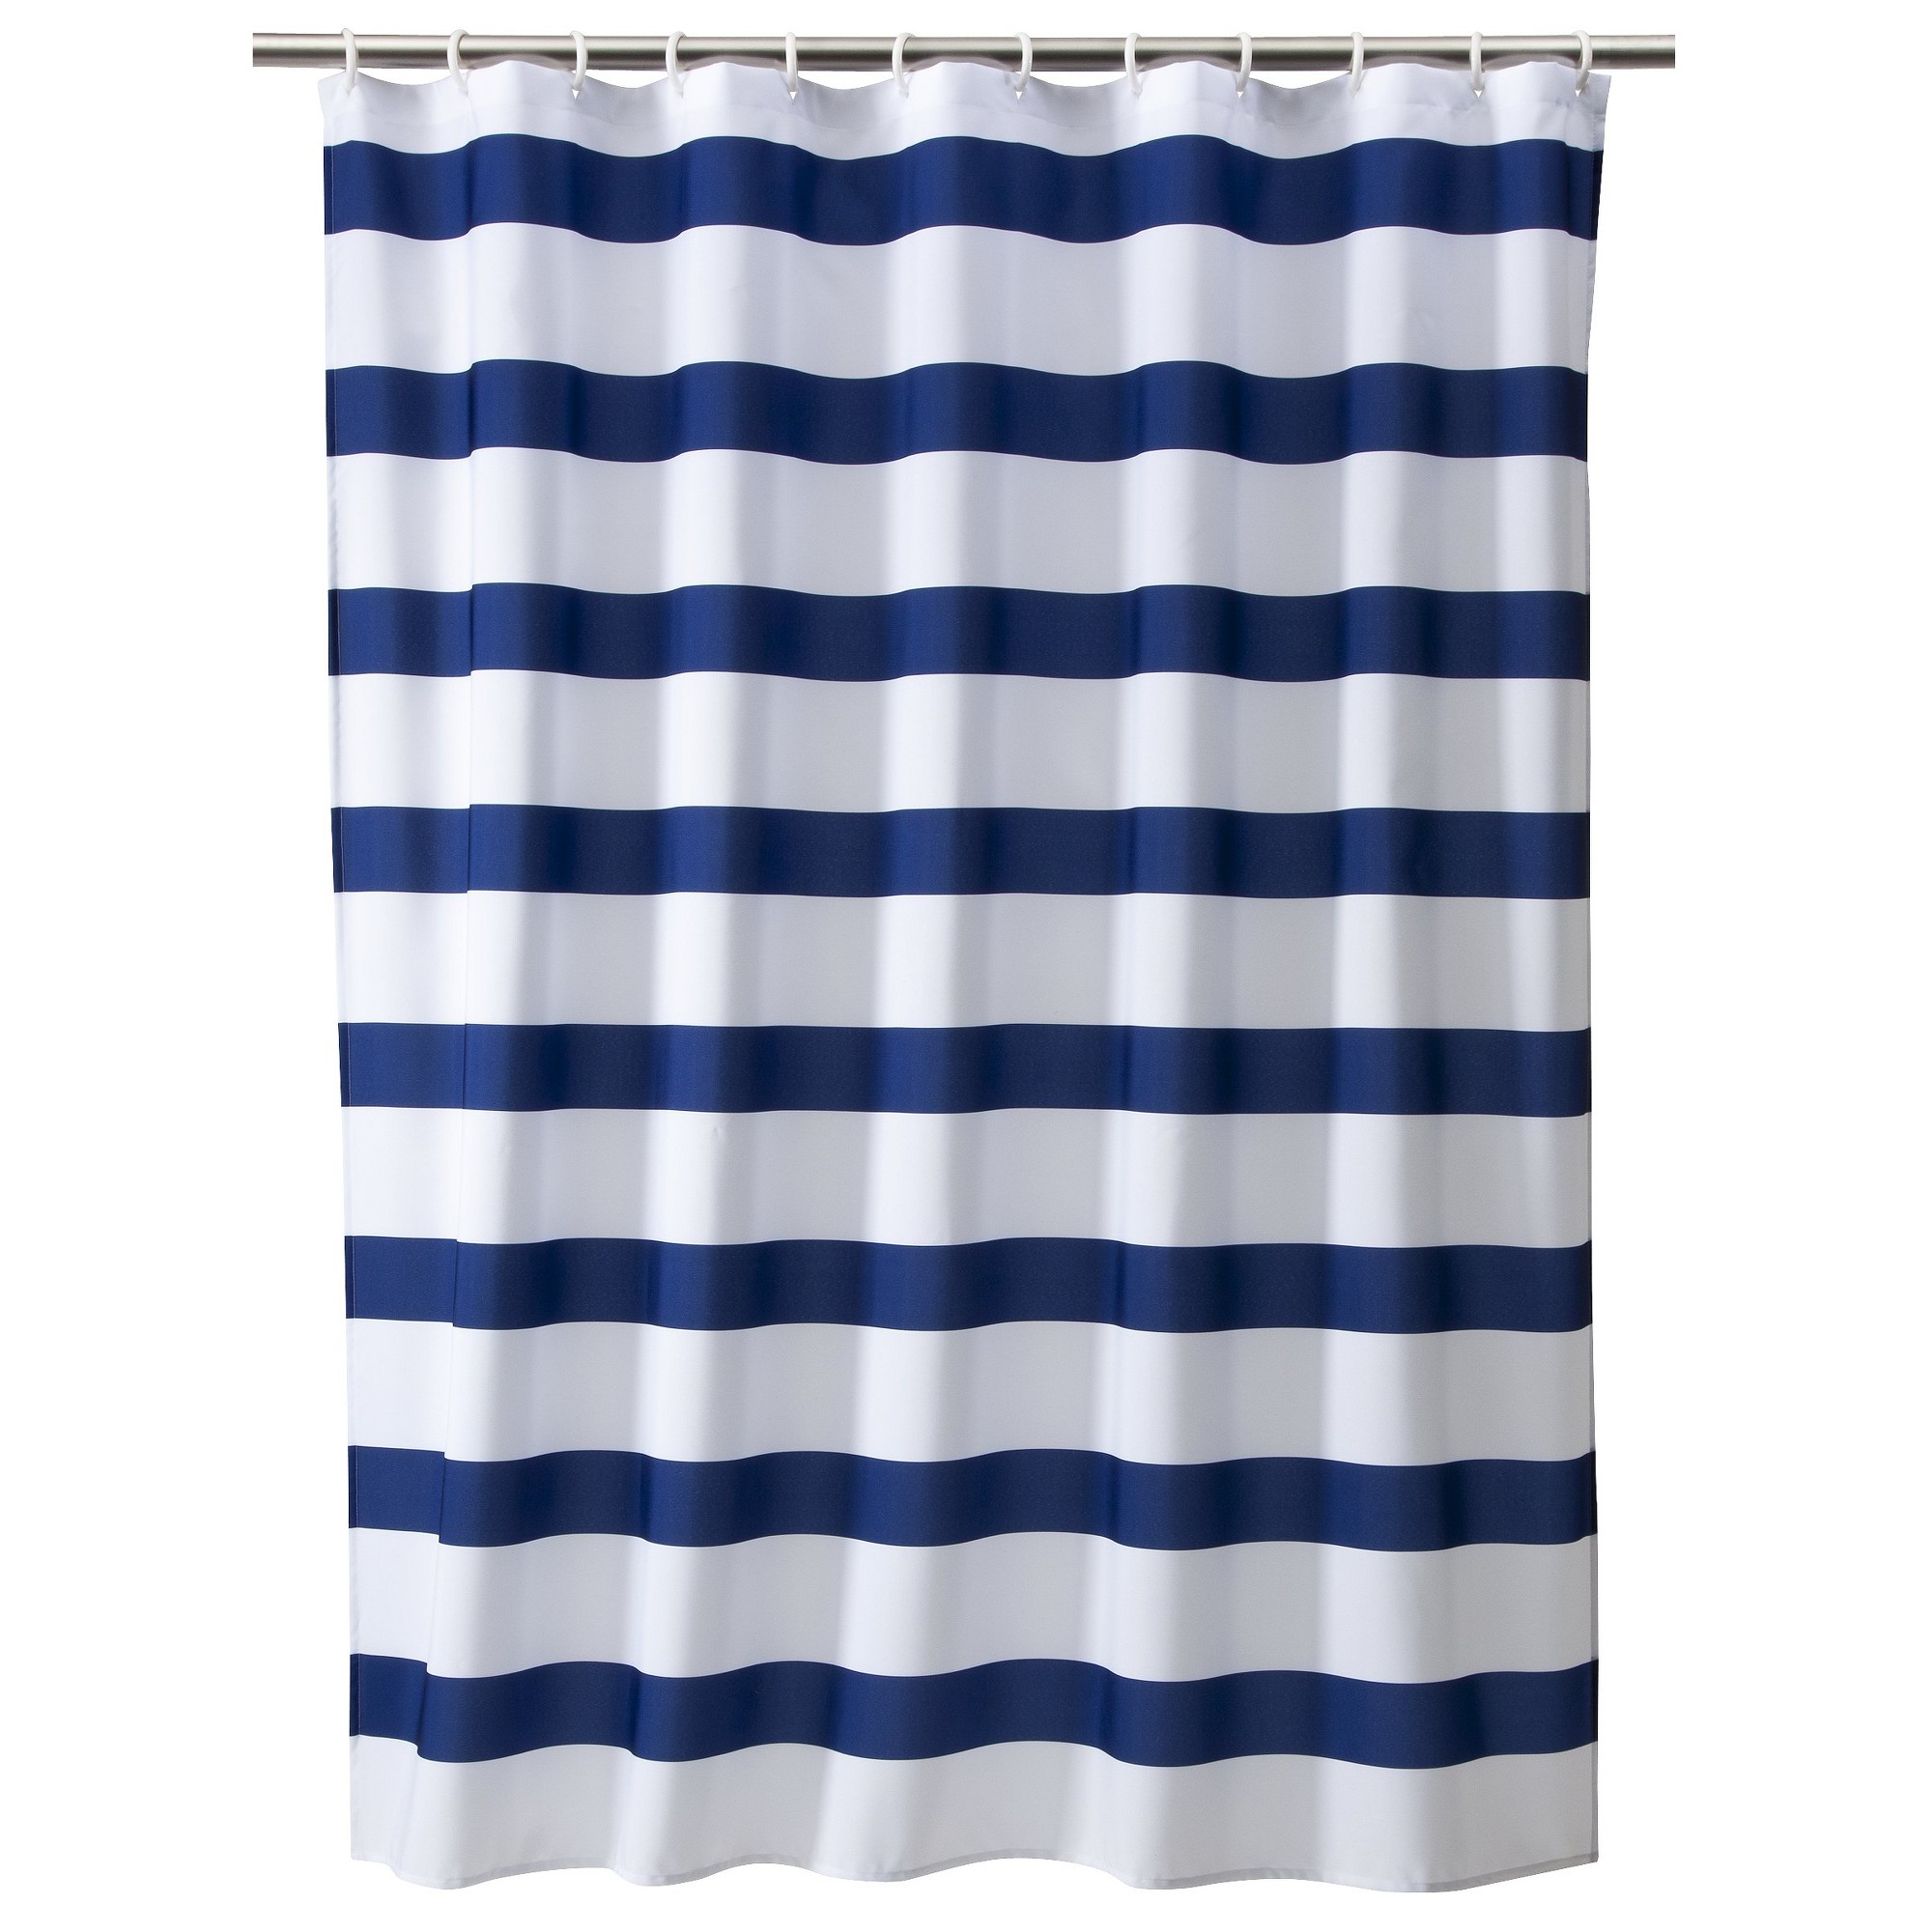 Rugby Stripe Shower Curtain White/Blue Cool - Room Essentials